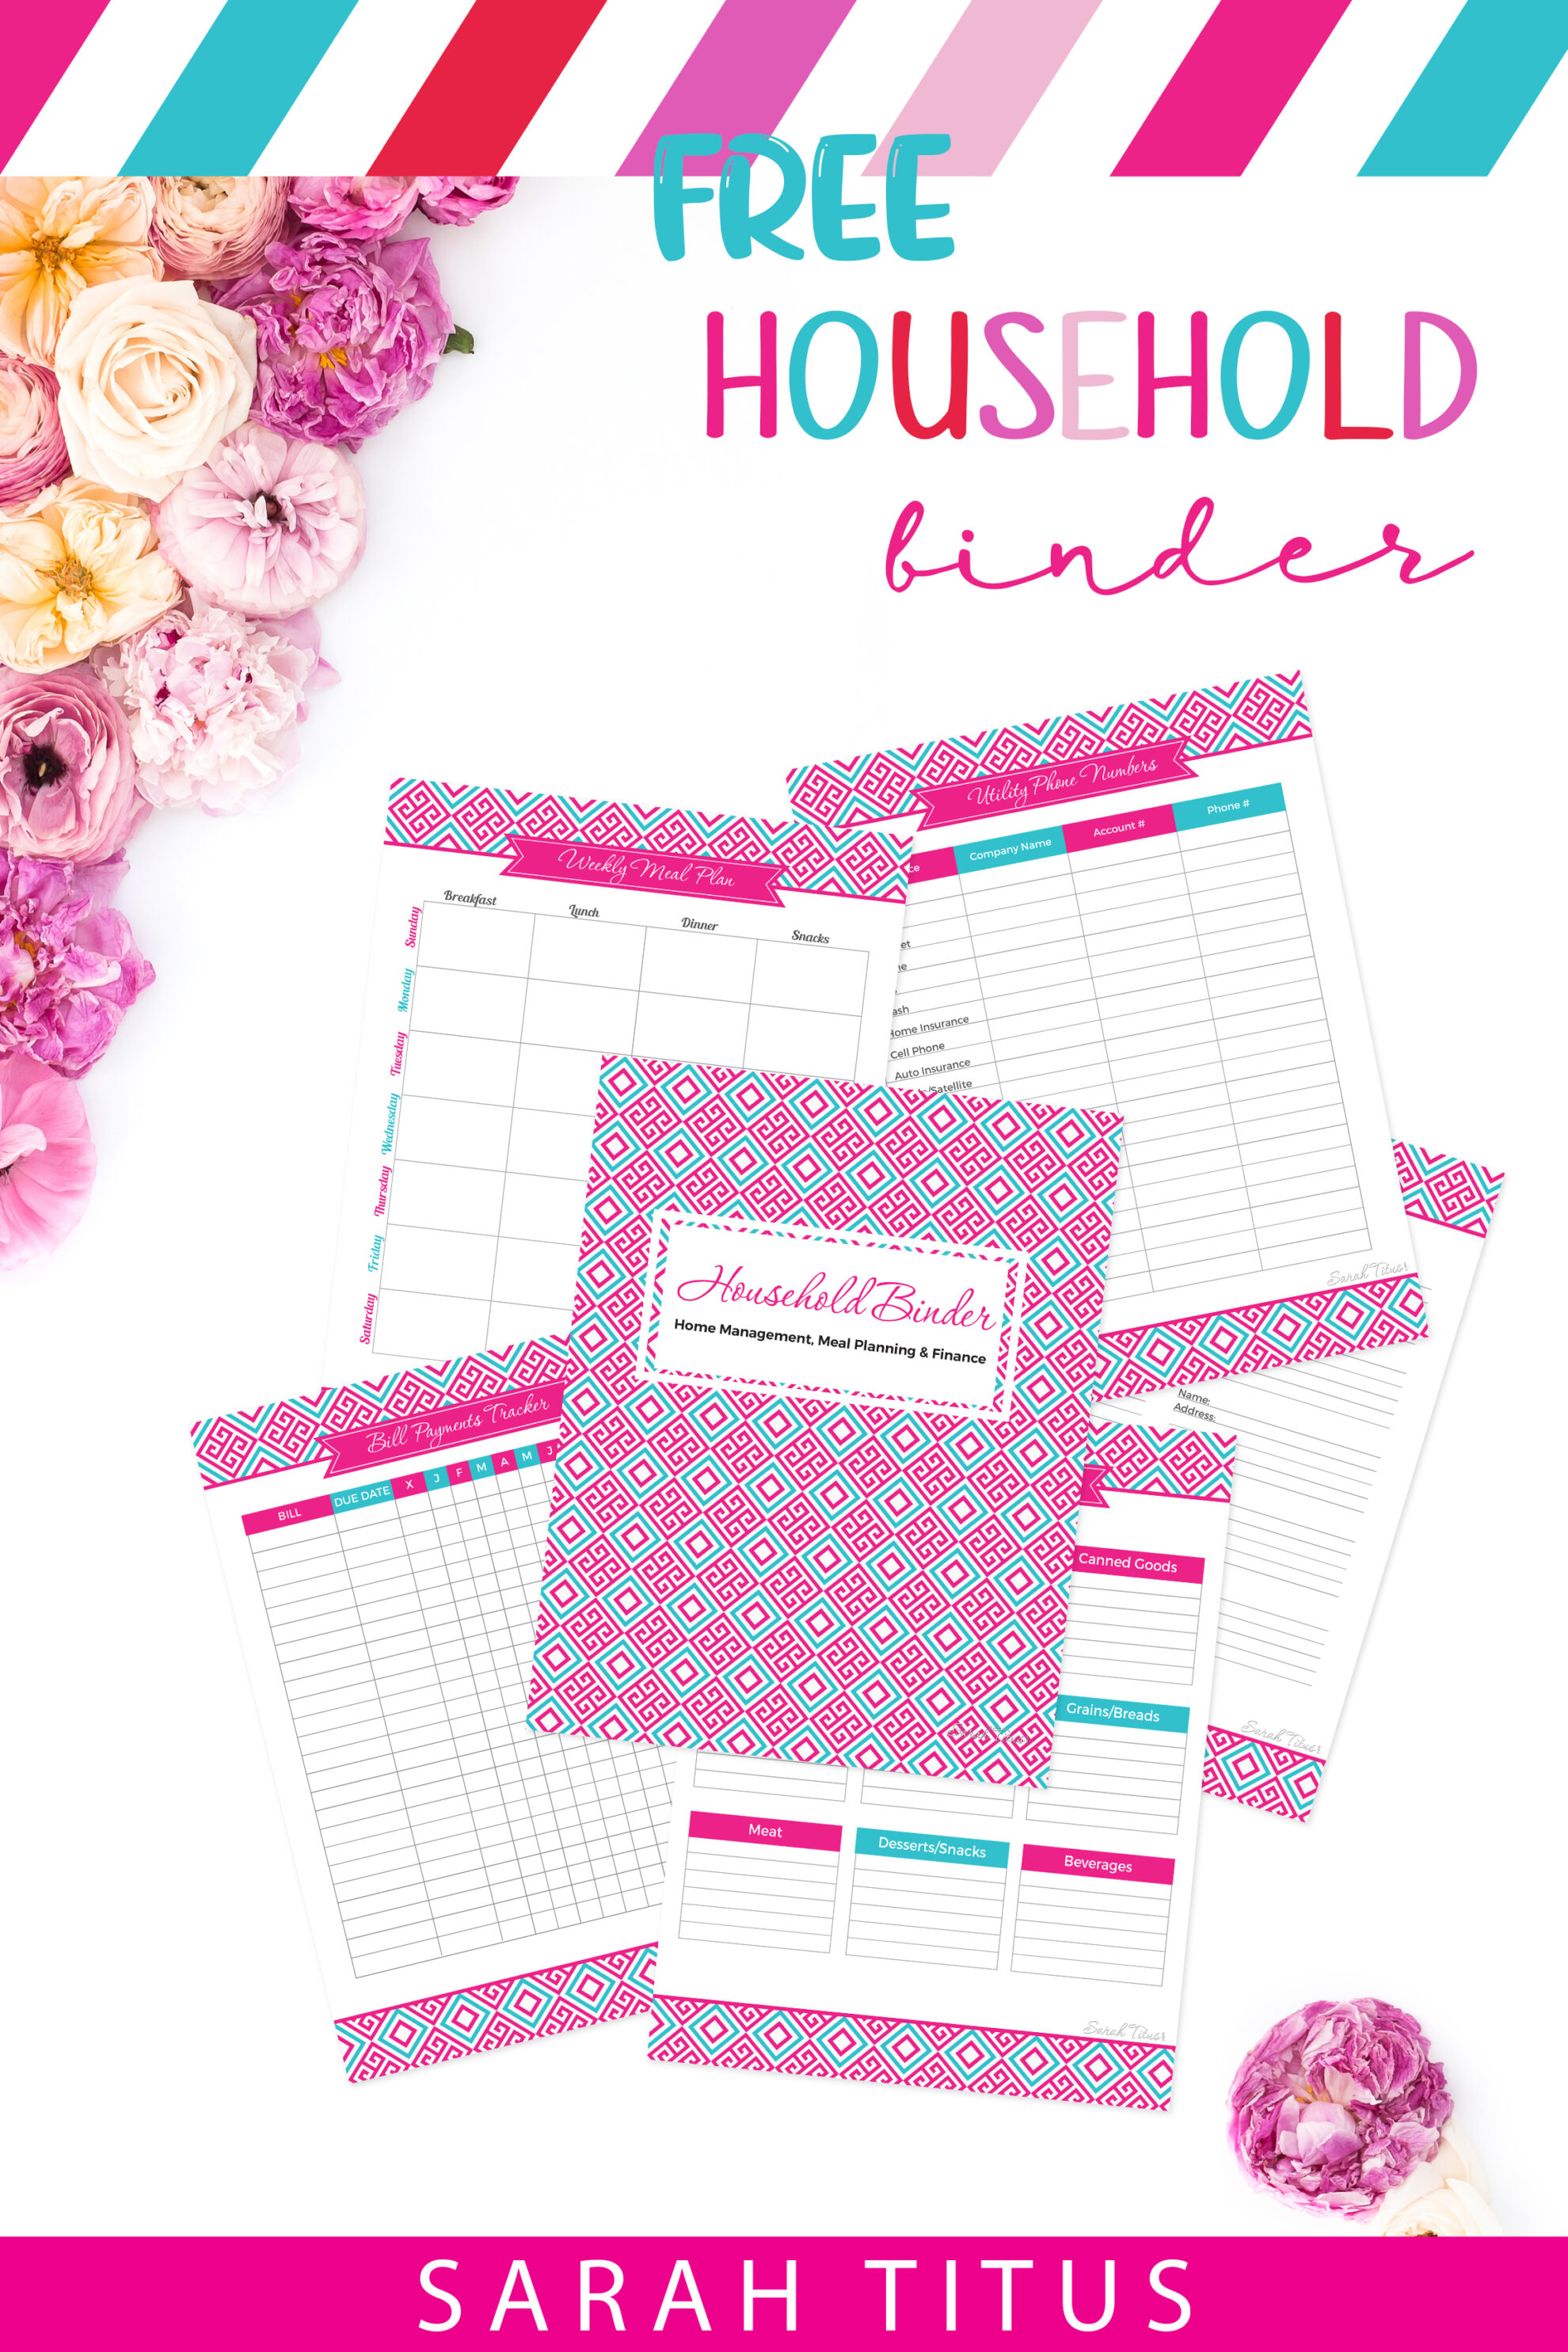 If you're an organization freak like me who just loves having everything all nice and tidy in one spot, this household binder free printables set is for you! #householdbinder #binder #freeprintables #binderprintables #homemakingbinder